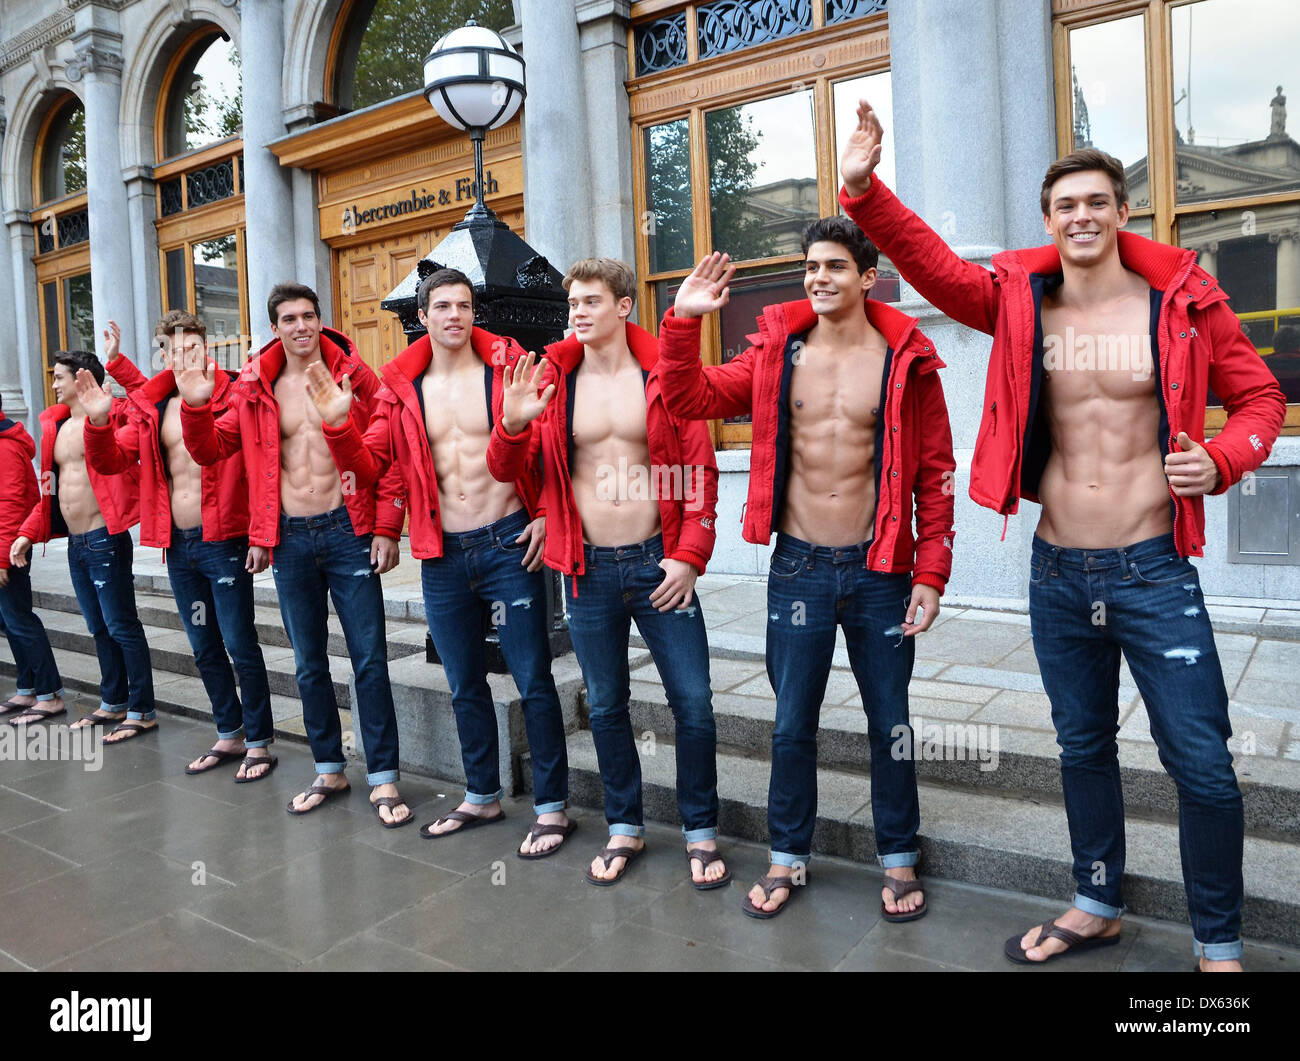 abercrombie & fitch american